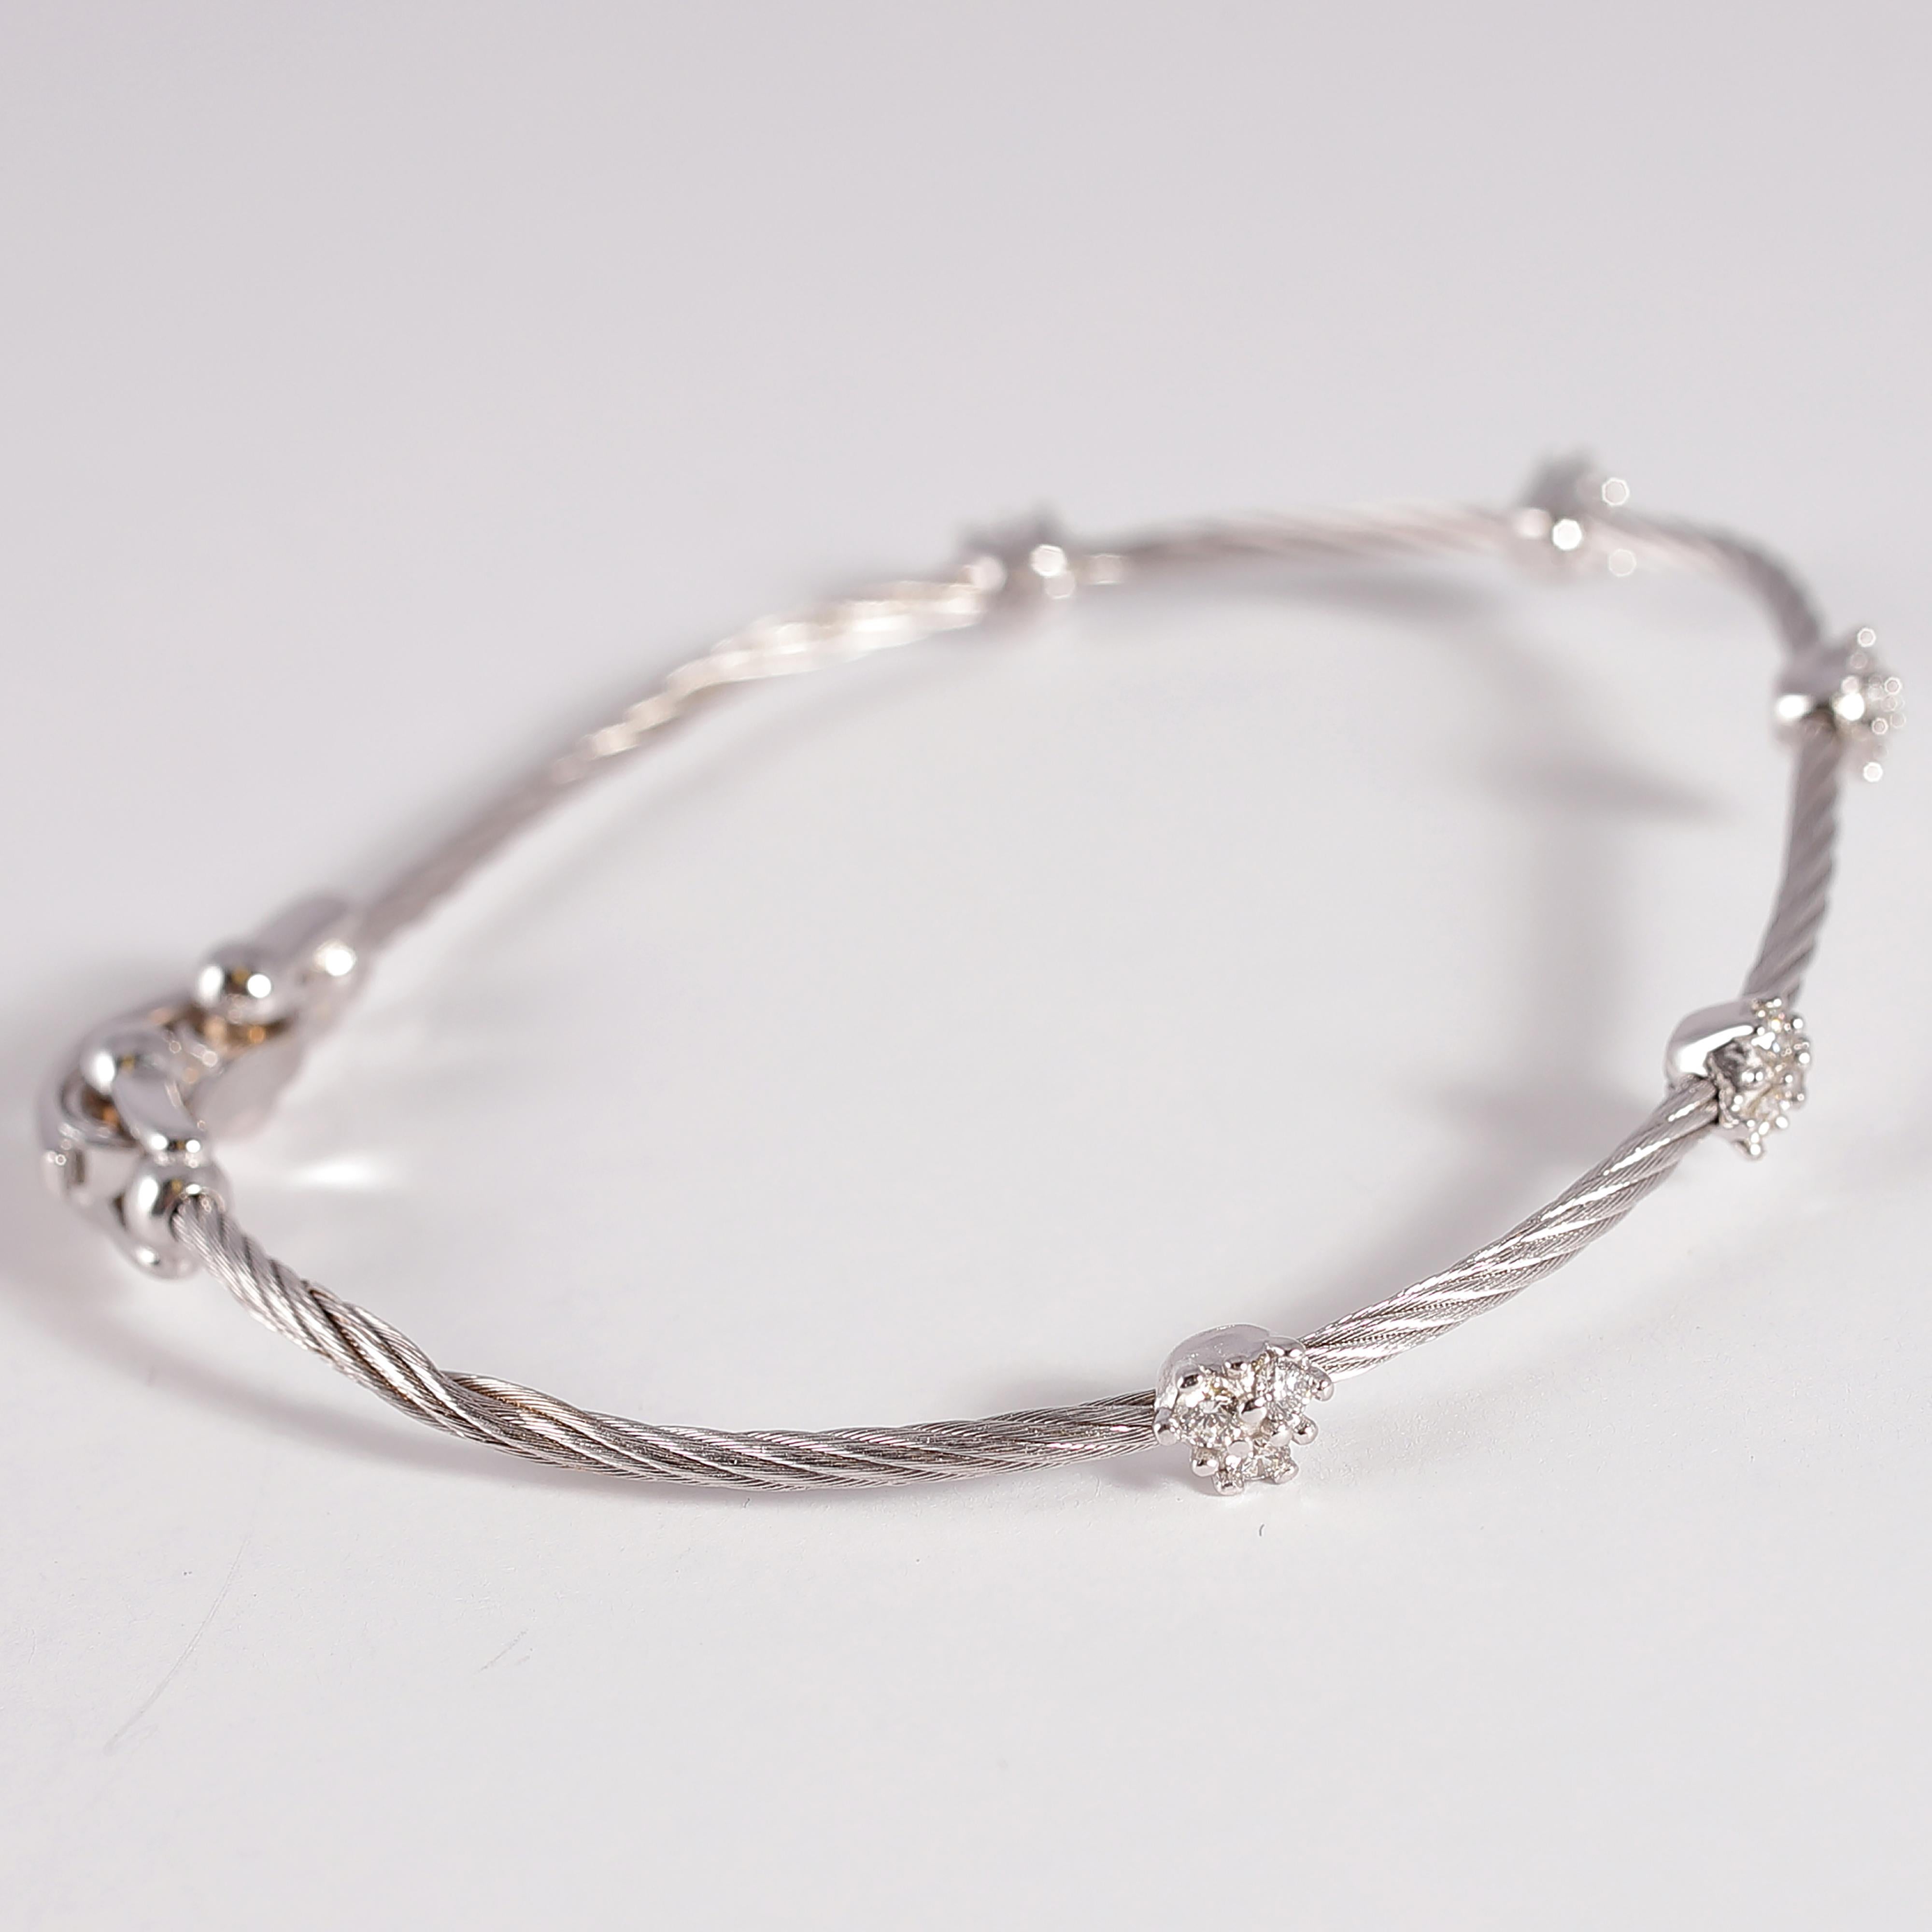 Paul Morelli Diamond Bracelet from the Cluster Collection 3